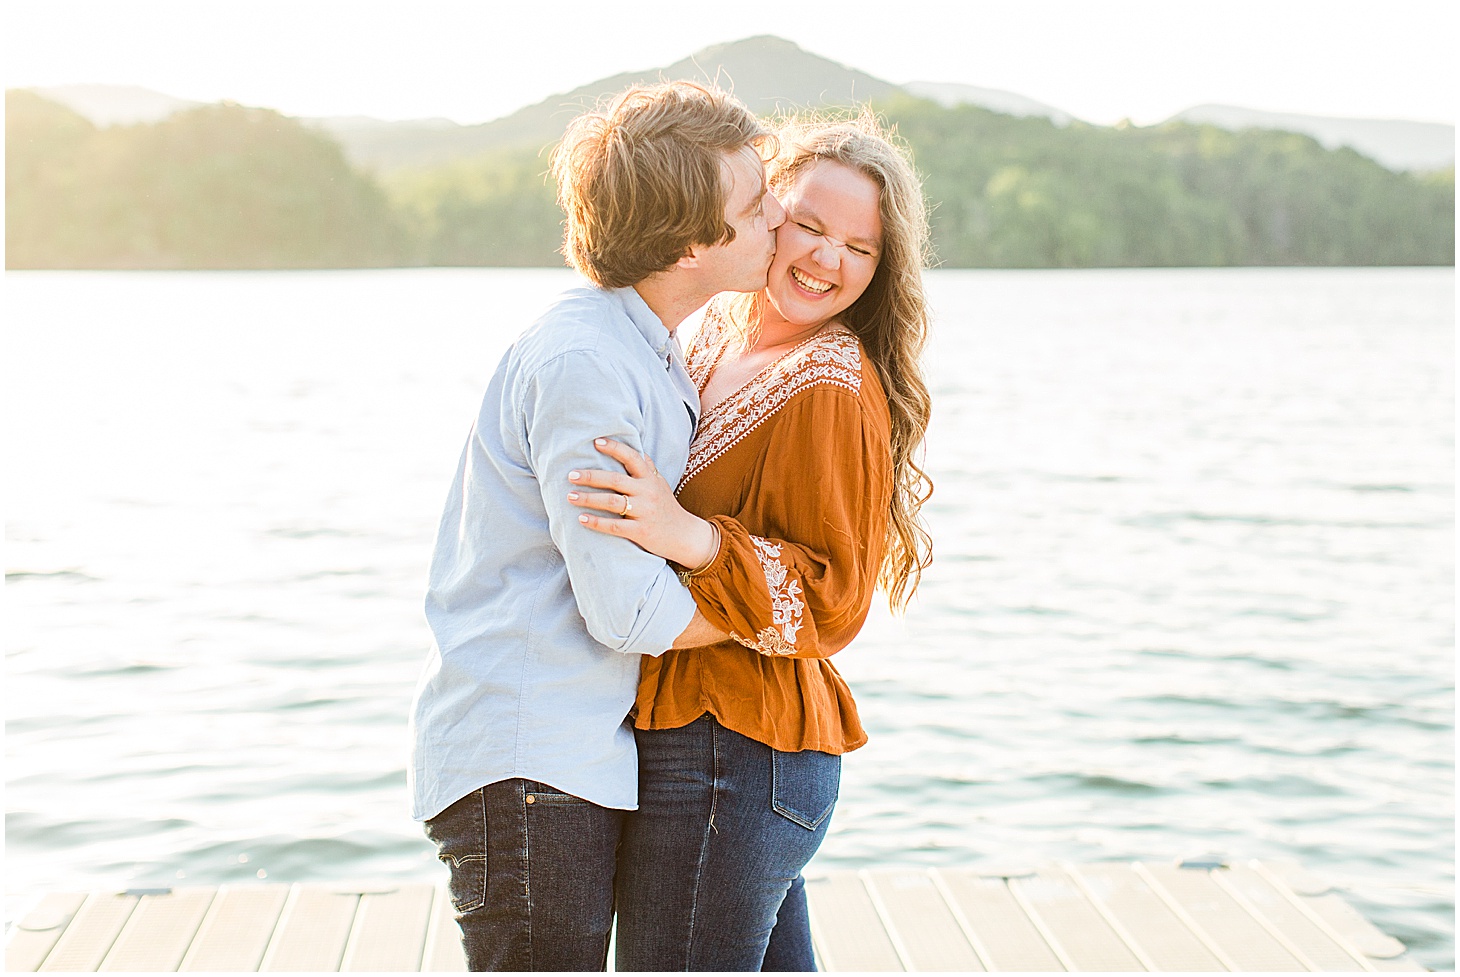 carvinscoveengagementsession_roanokeengagementsession_carvinscove_virginiawedding_virginiaweddingphotographer_vaweddingphotographer_photo_0023.jpg